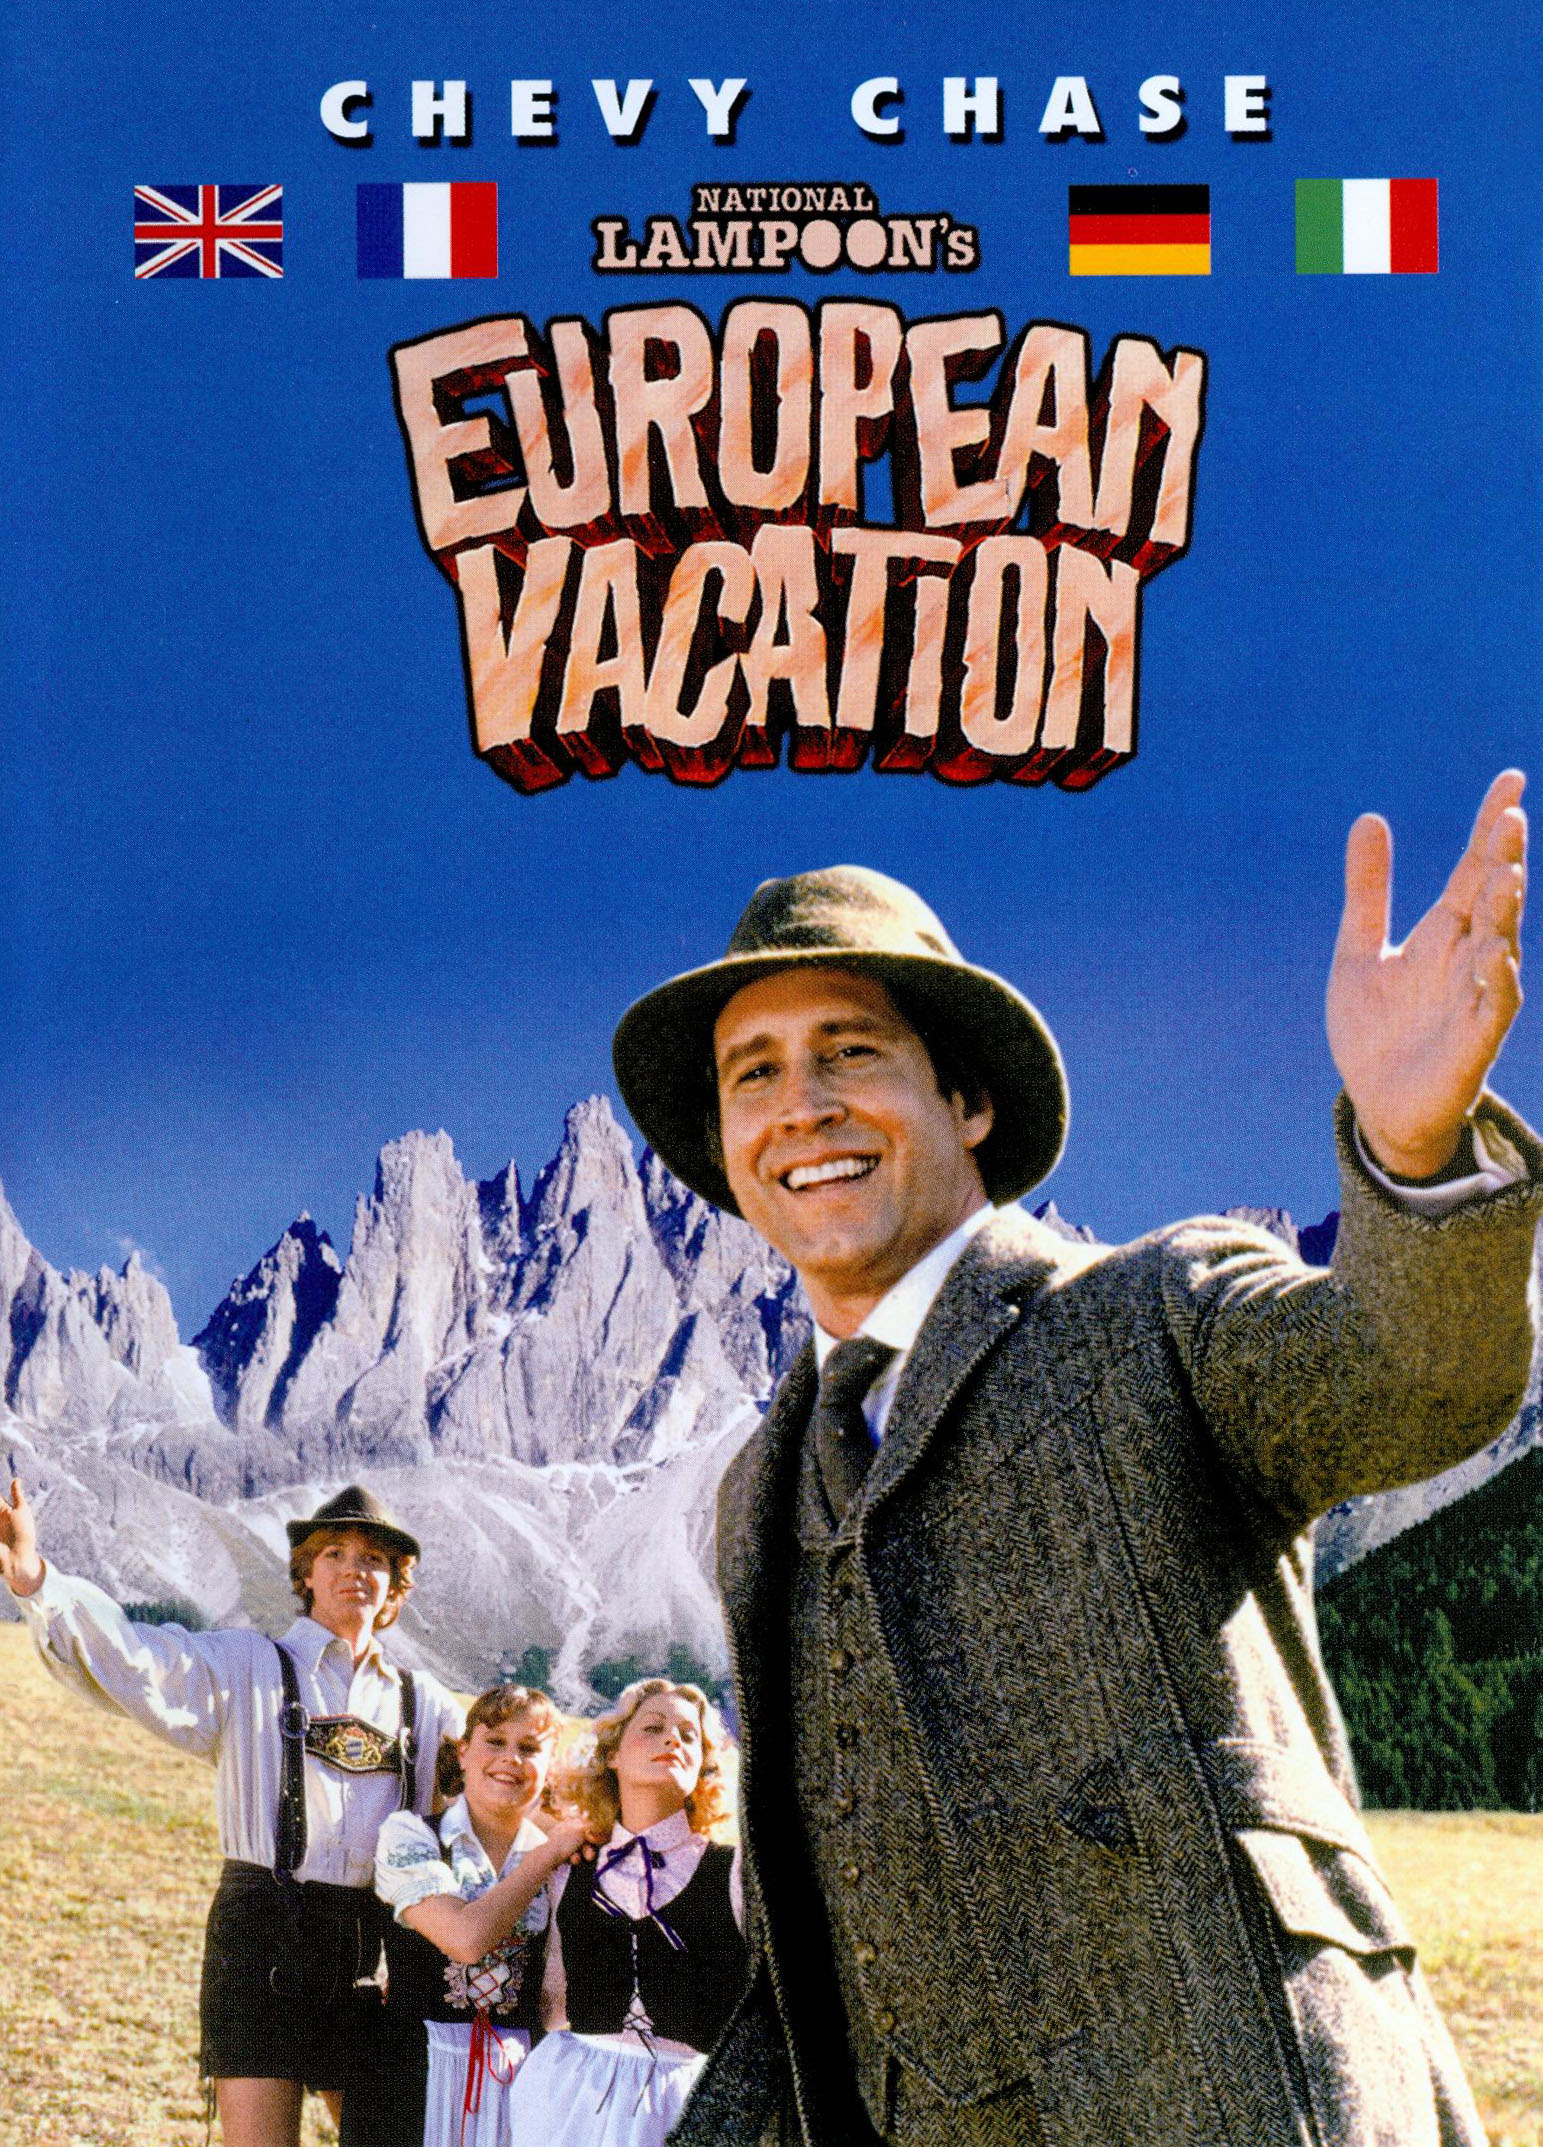 The Ultimate Vacation Collection (National Lampoon's Vacation / Vegas  Vacation / European Vacation / Christmas Vacation) : Various:  : DVD e Blu-ray